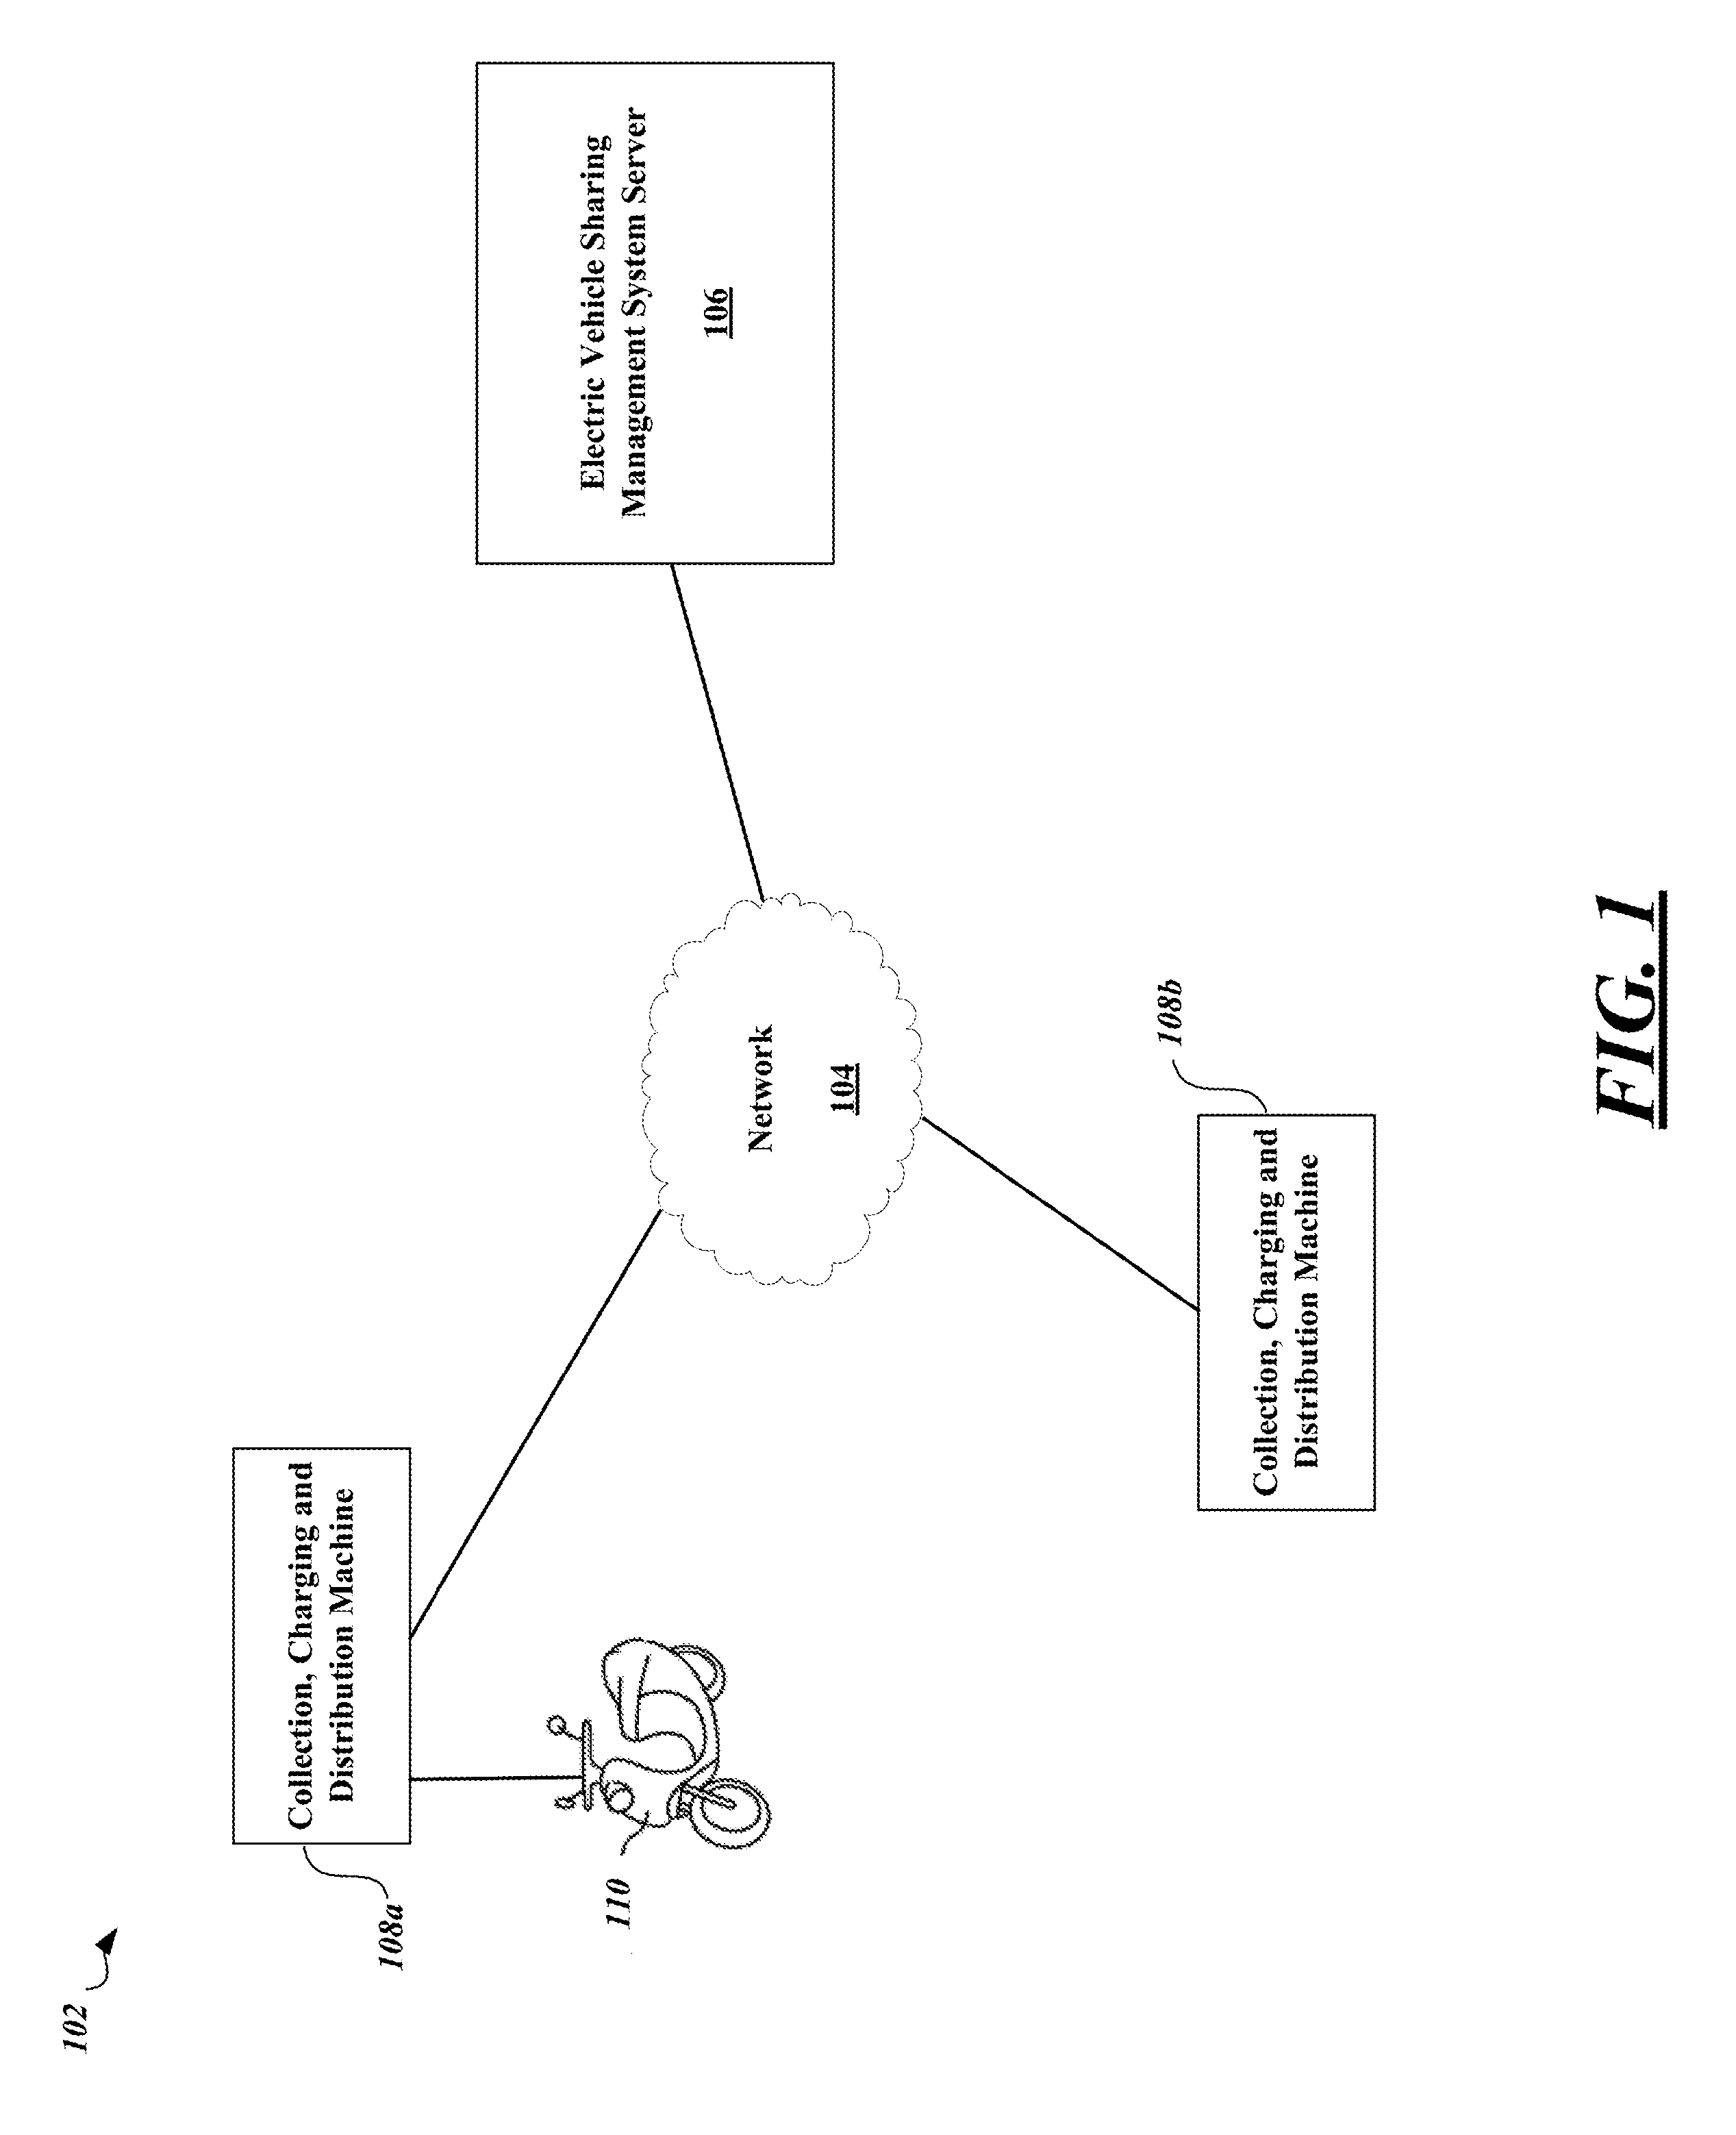 Apparatus, method and article for electric vehicle sharing